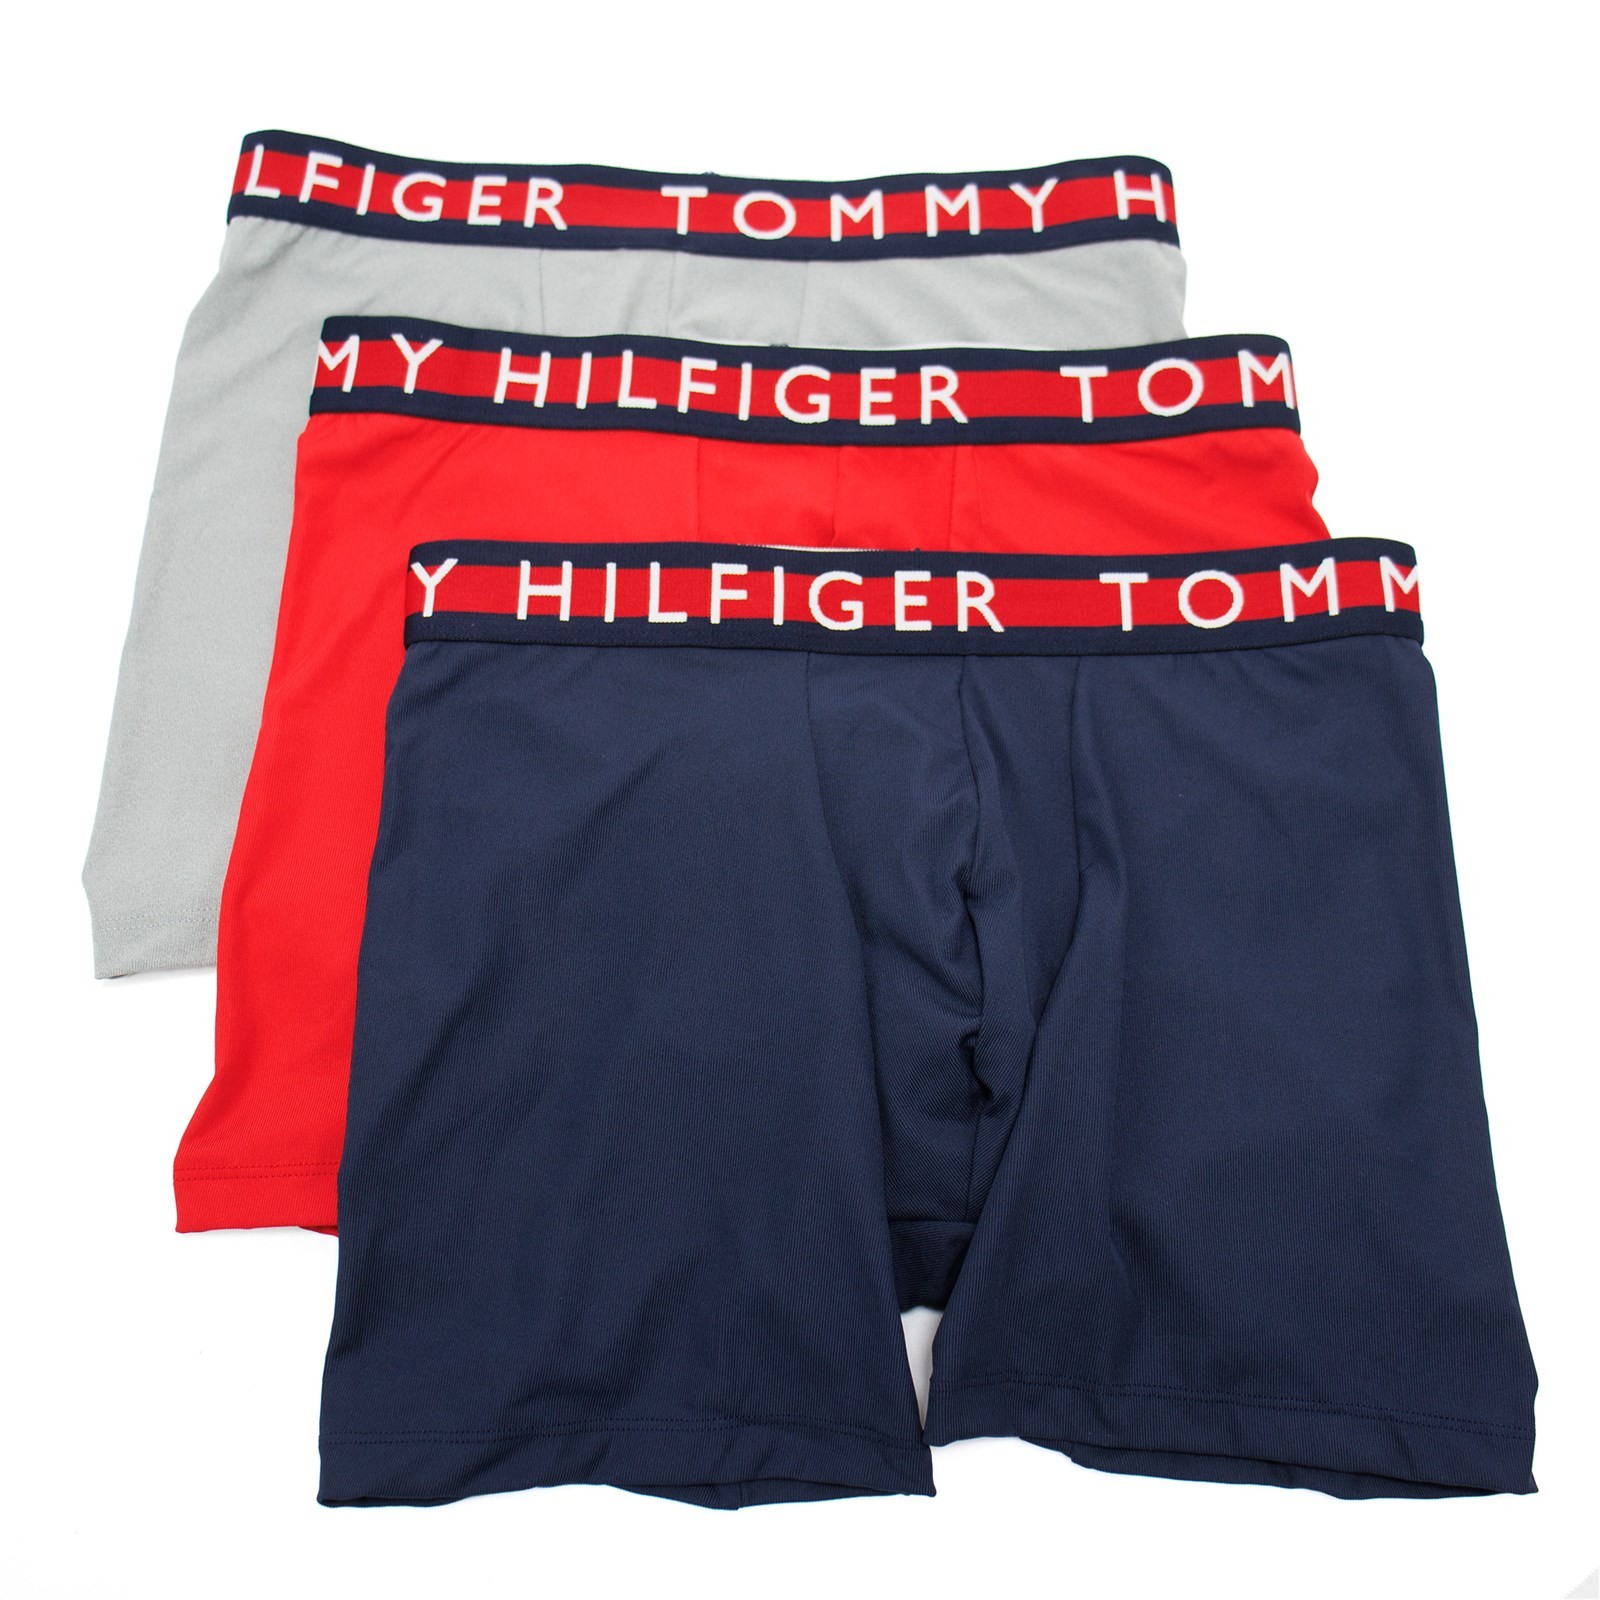 Tommy Hilfiger Everyday Micro Trunks 3-Pack (Rouge) Men's Underwear -  ShopStyle Boxers